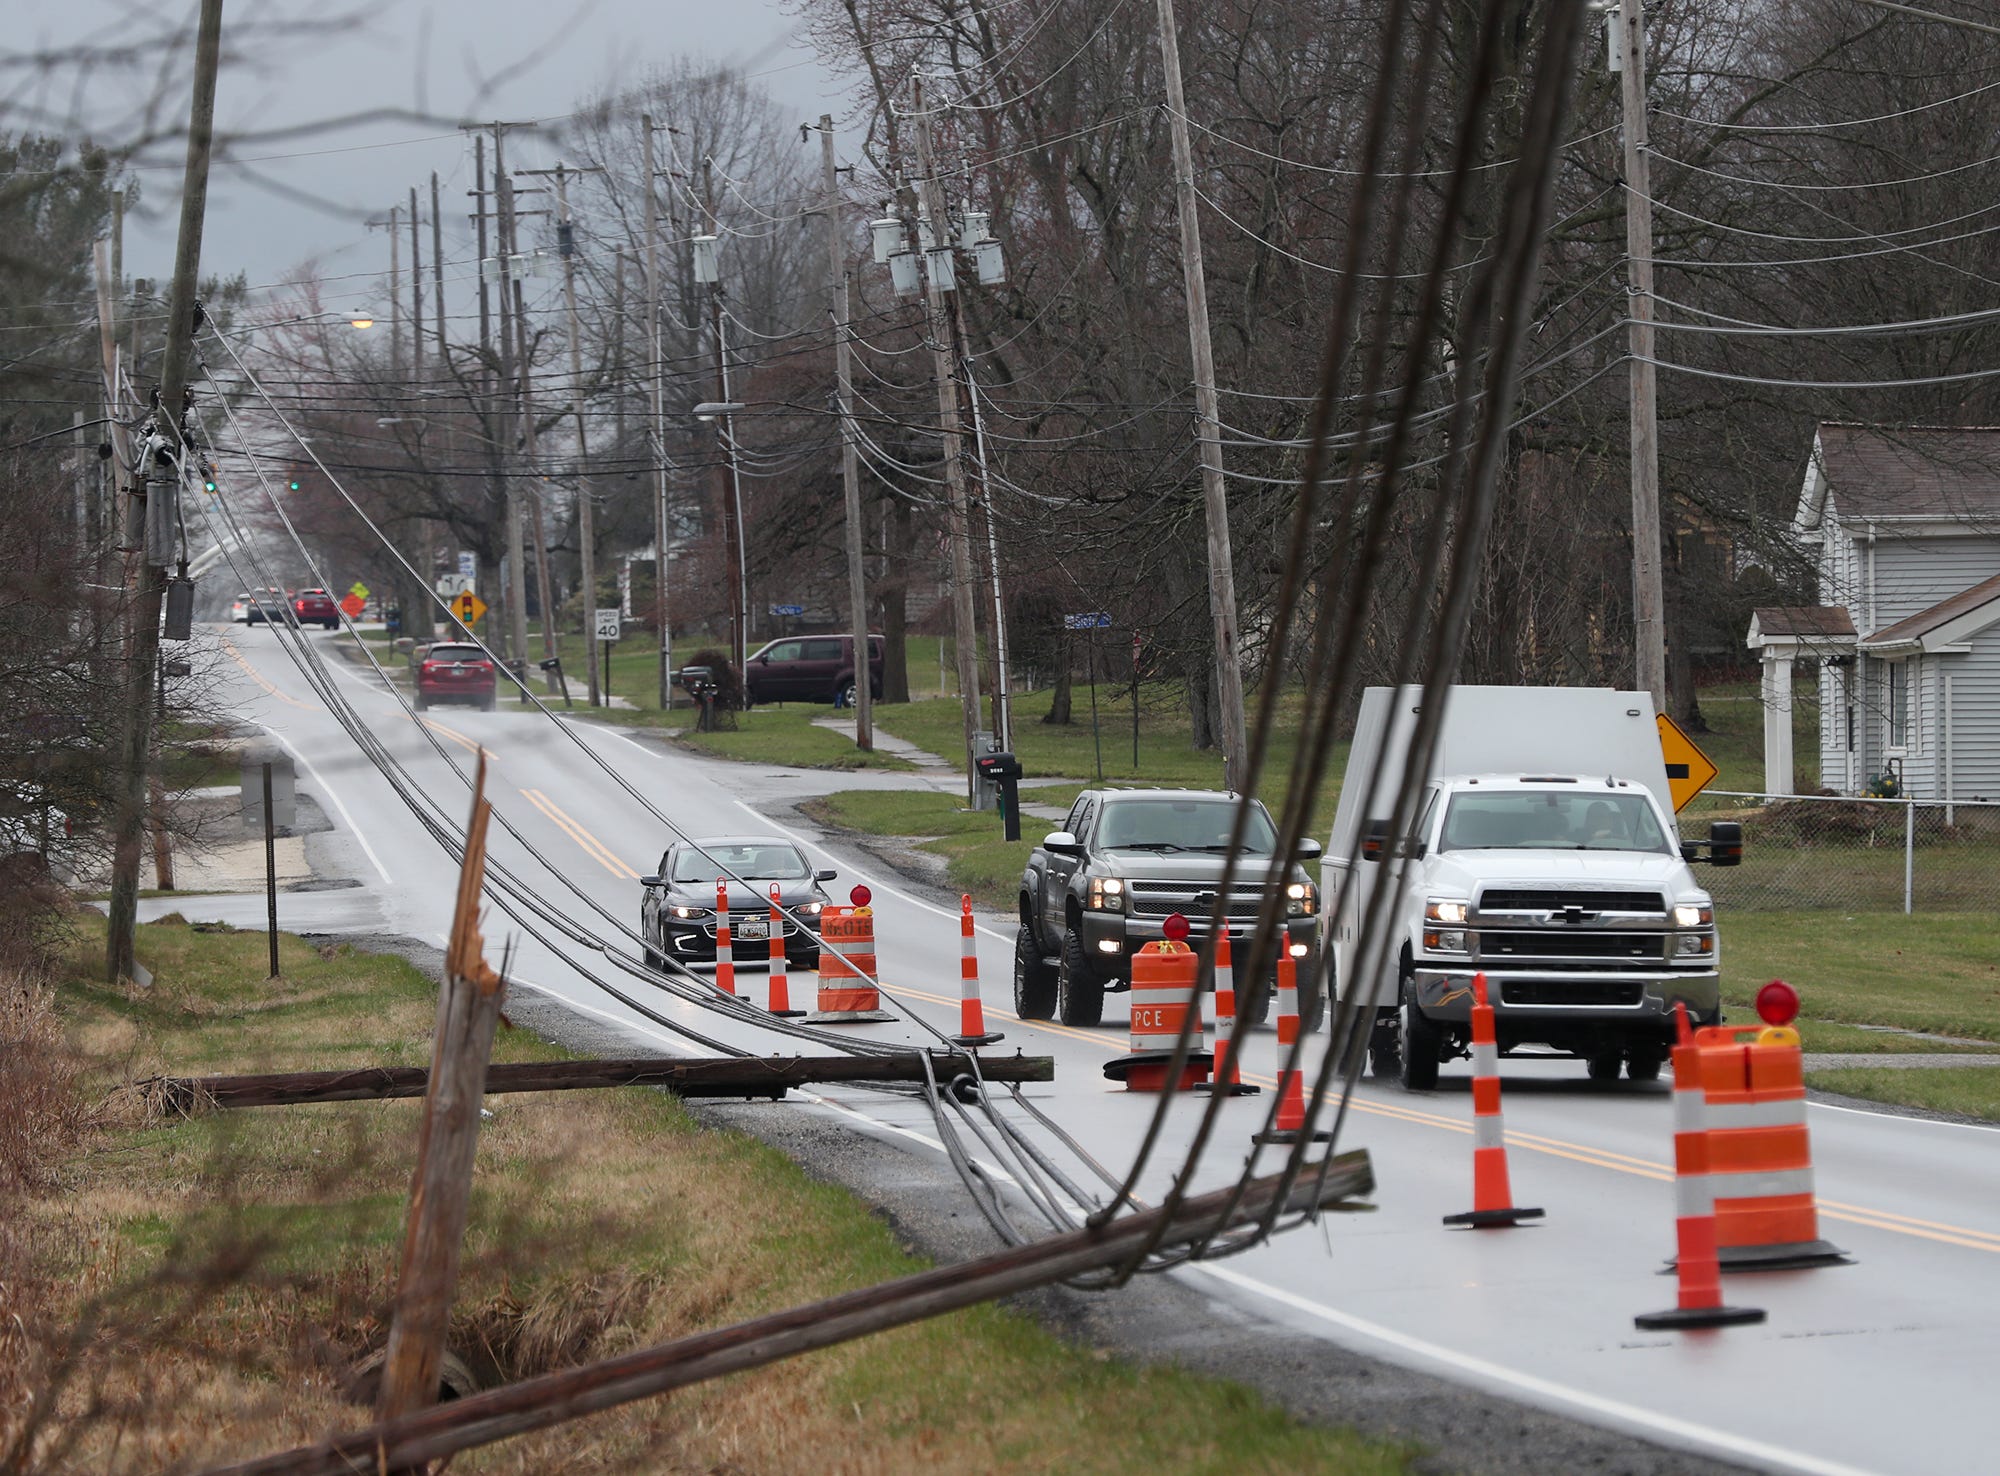 Vehicles traveling eastbound Monday on Tallmadge Road drive past downed utility poles and wires across from Homeland Cemetery in Rootstown.